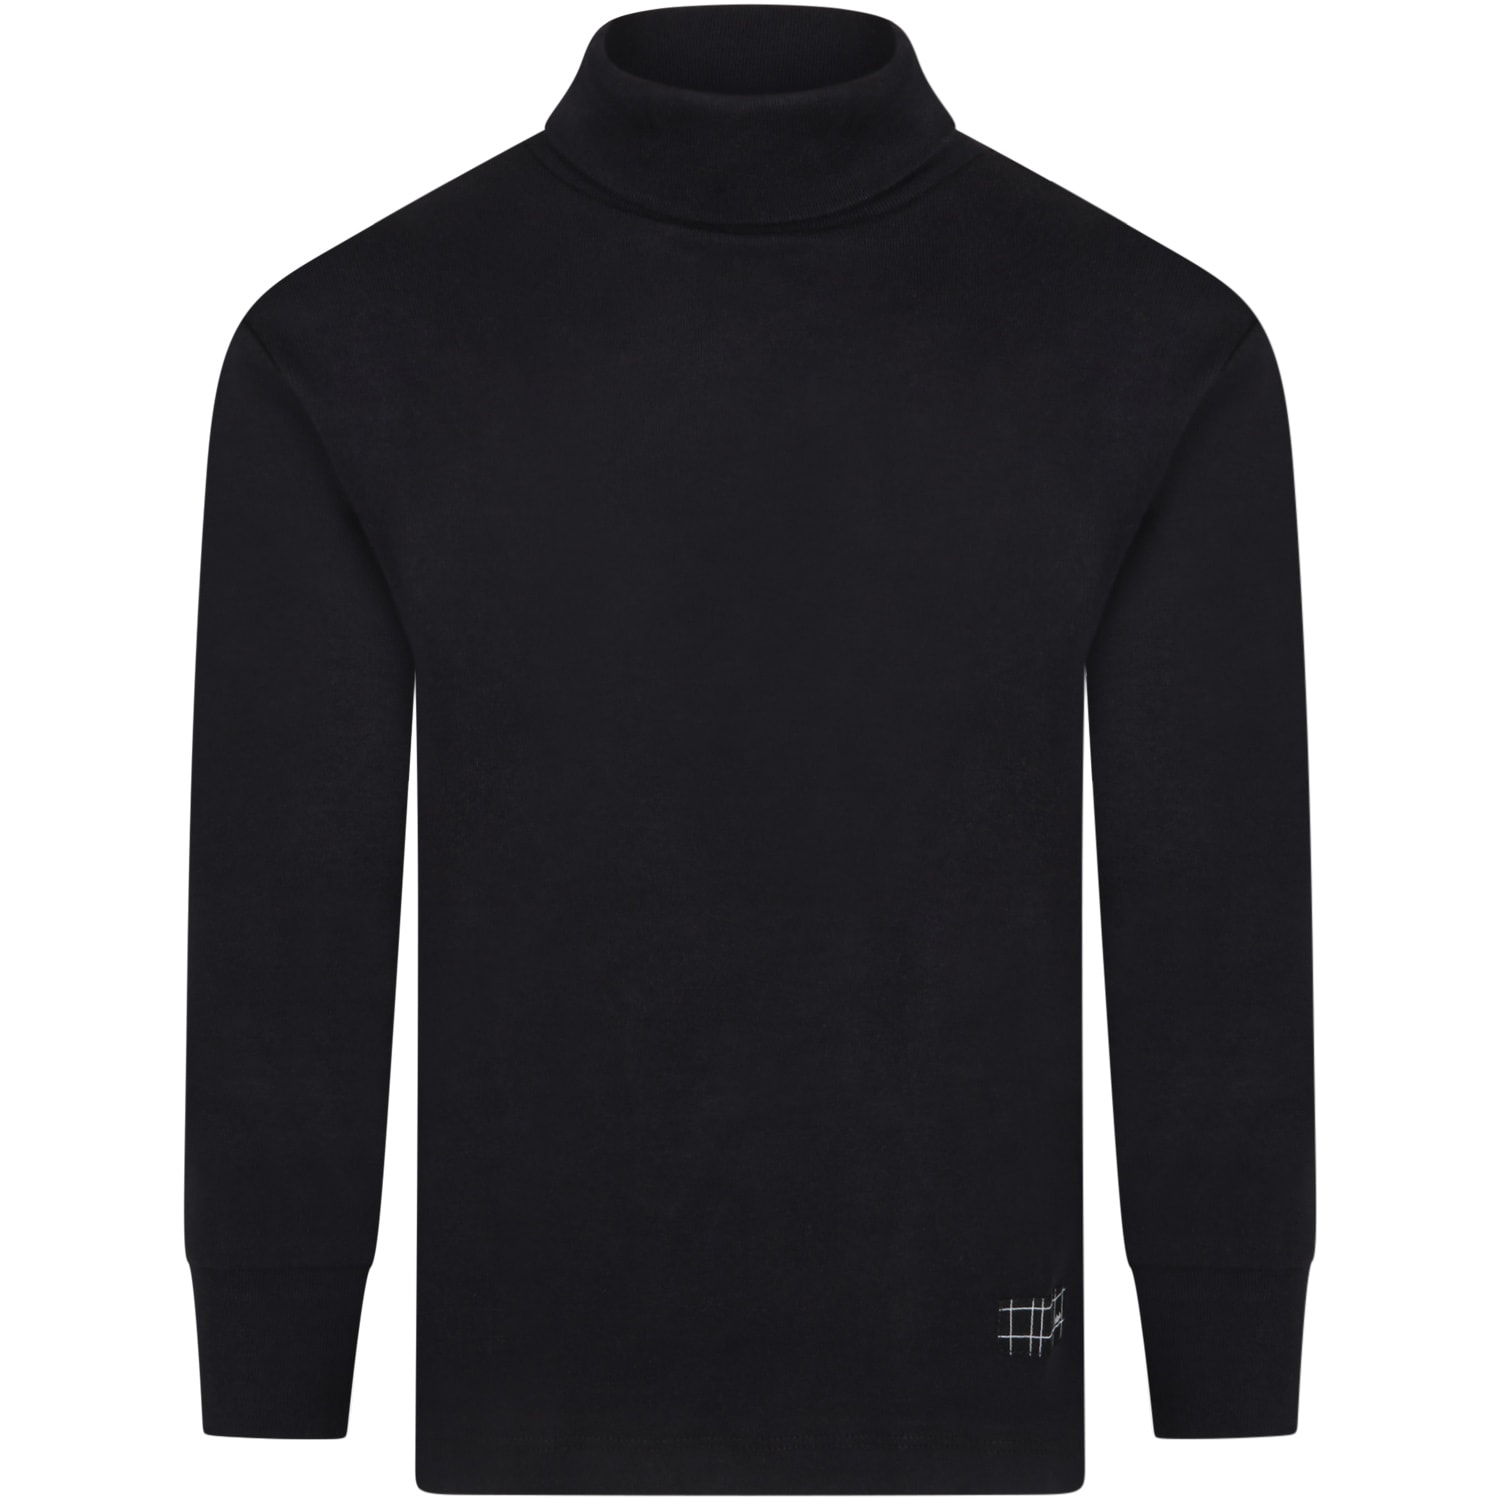 Molo Black Turtleneck For Kids With Patch Logo